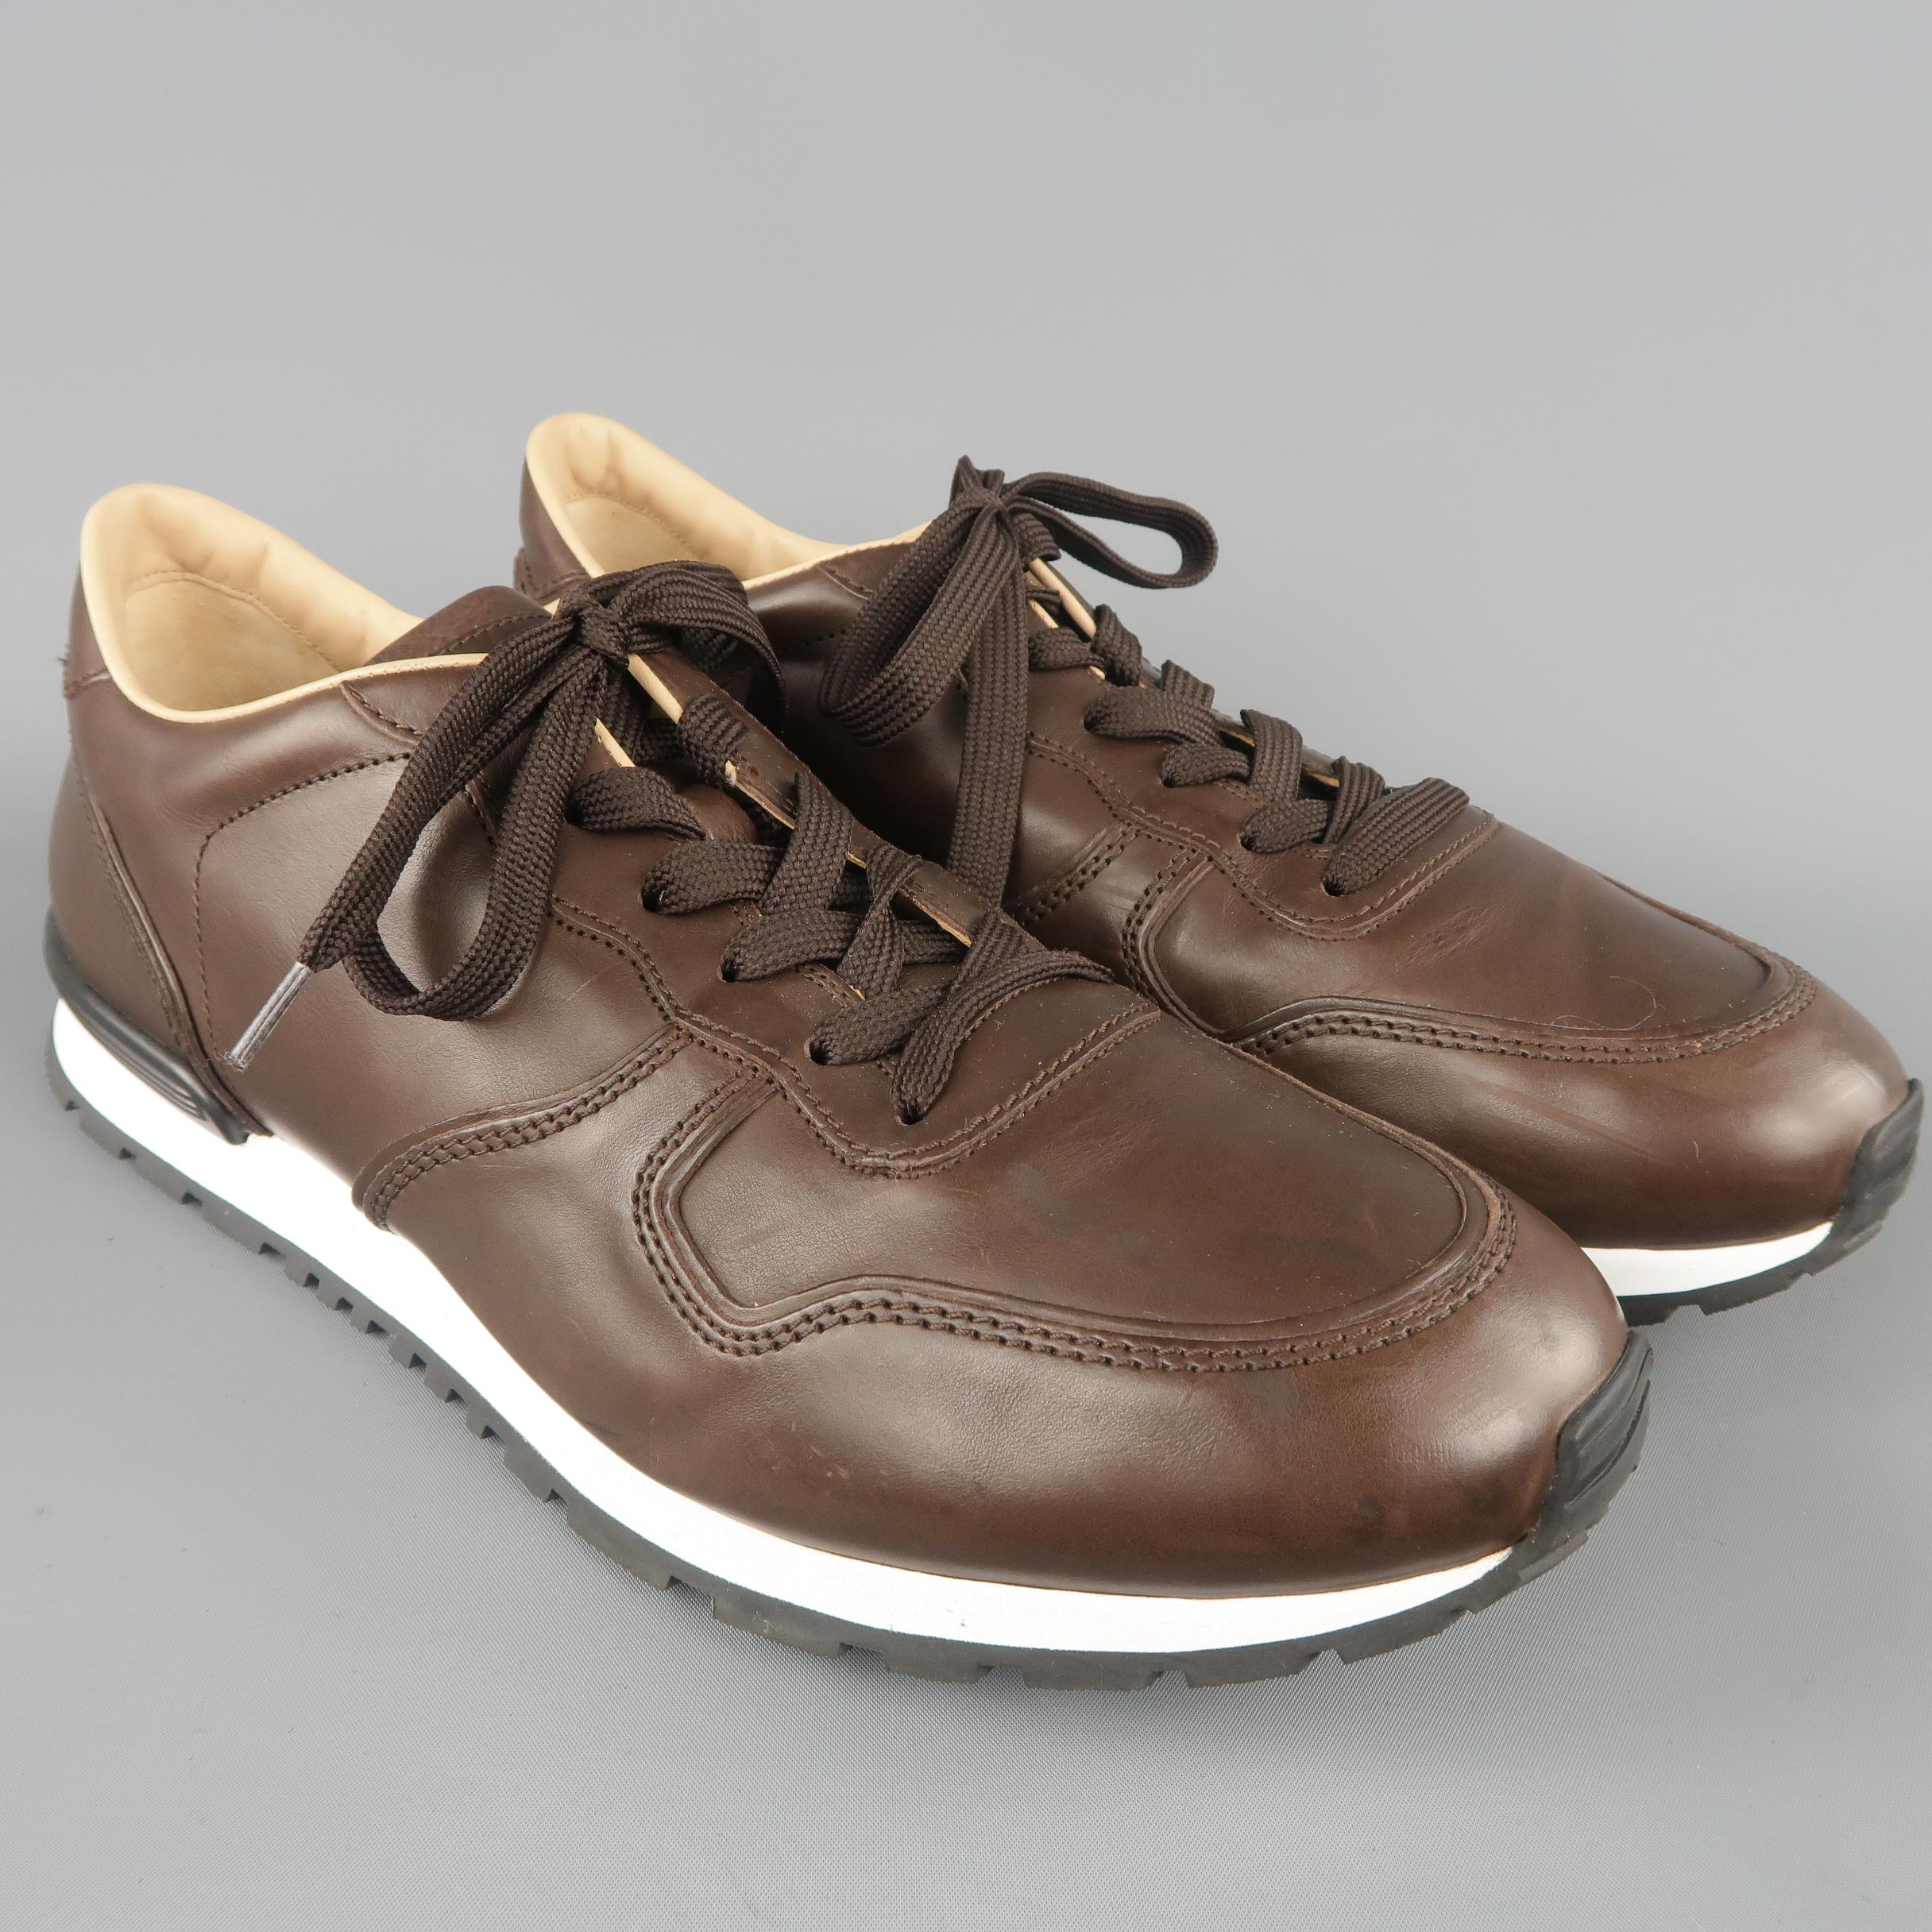 TOD'S trainers come in chocolate brown leather with a lace up front, and white midsole. Made in Italy.
 
Excellent Pre-Owned Condition.
Marked: UK 11
 
Outsole: 13 x 4.5 in.